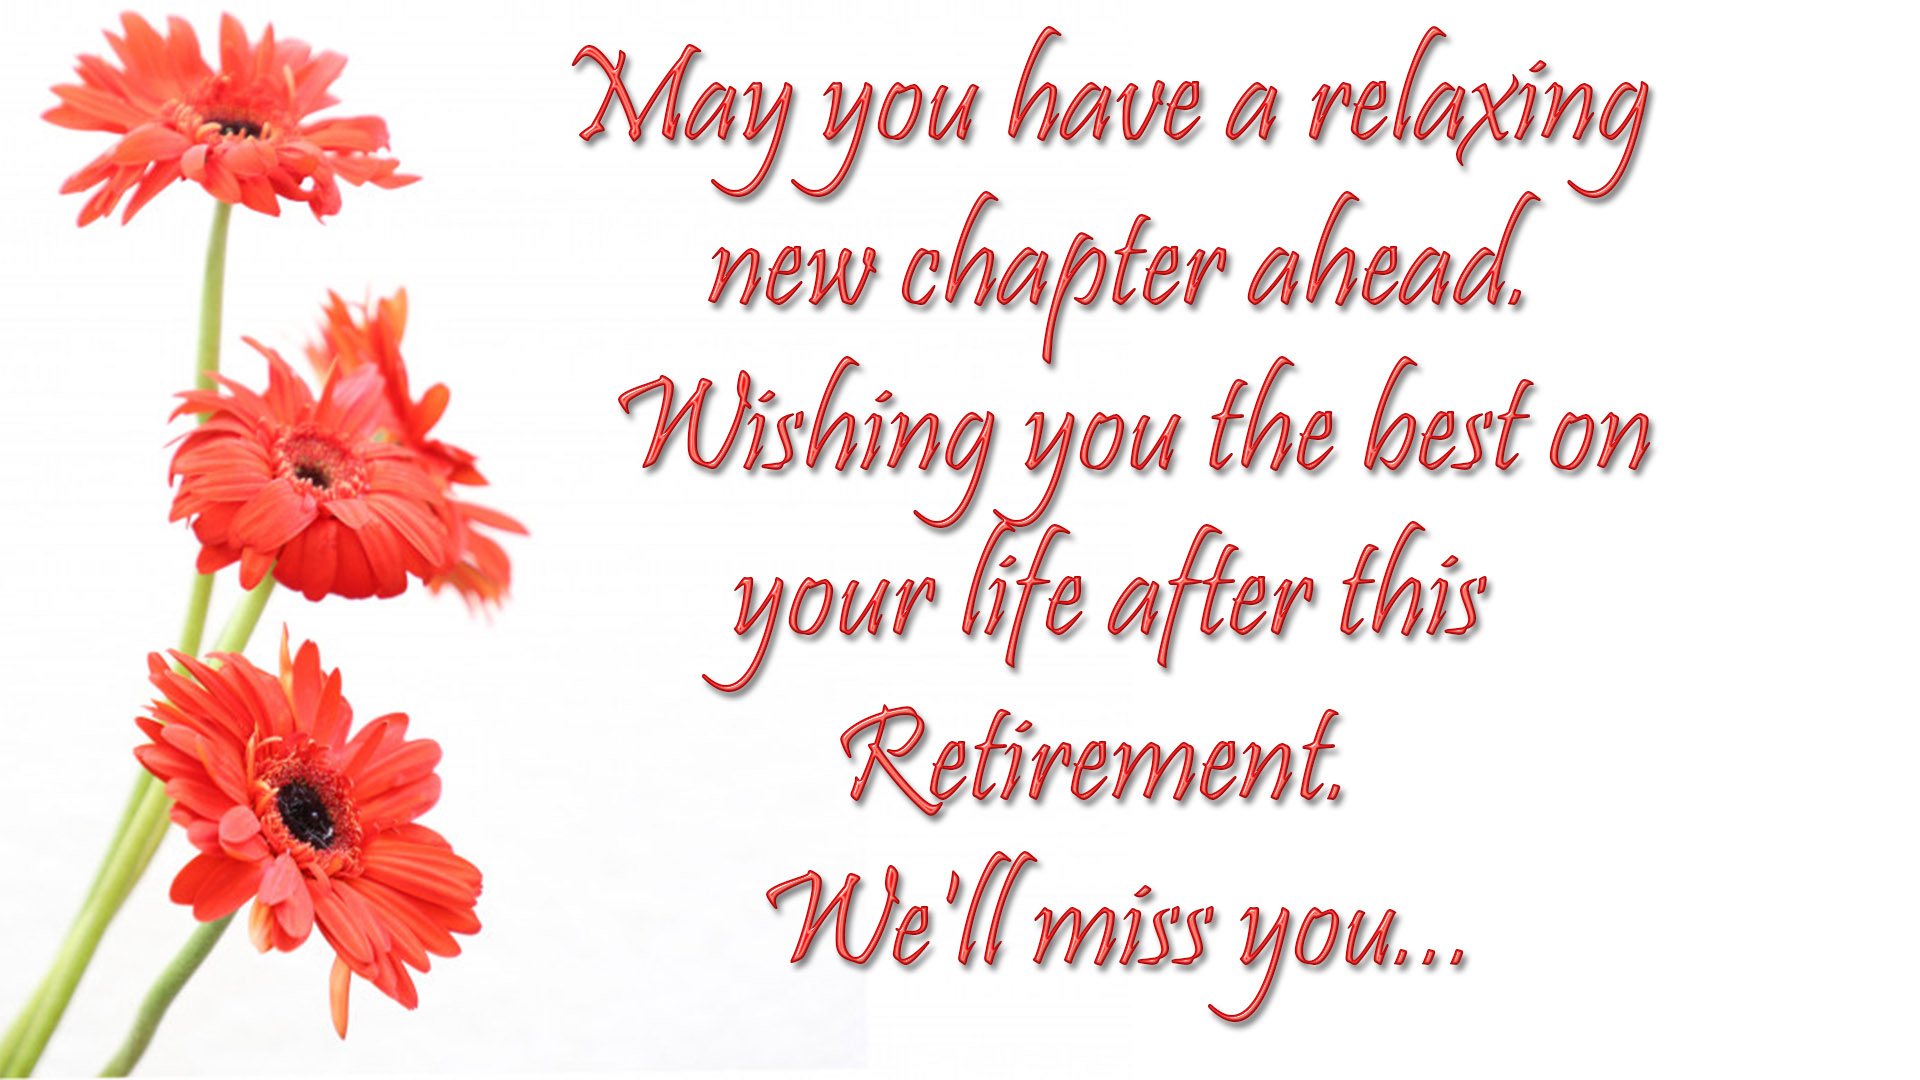 Happy Retirement Wishes, Quotes & Messages Images